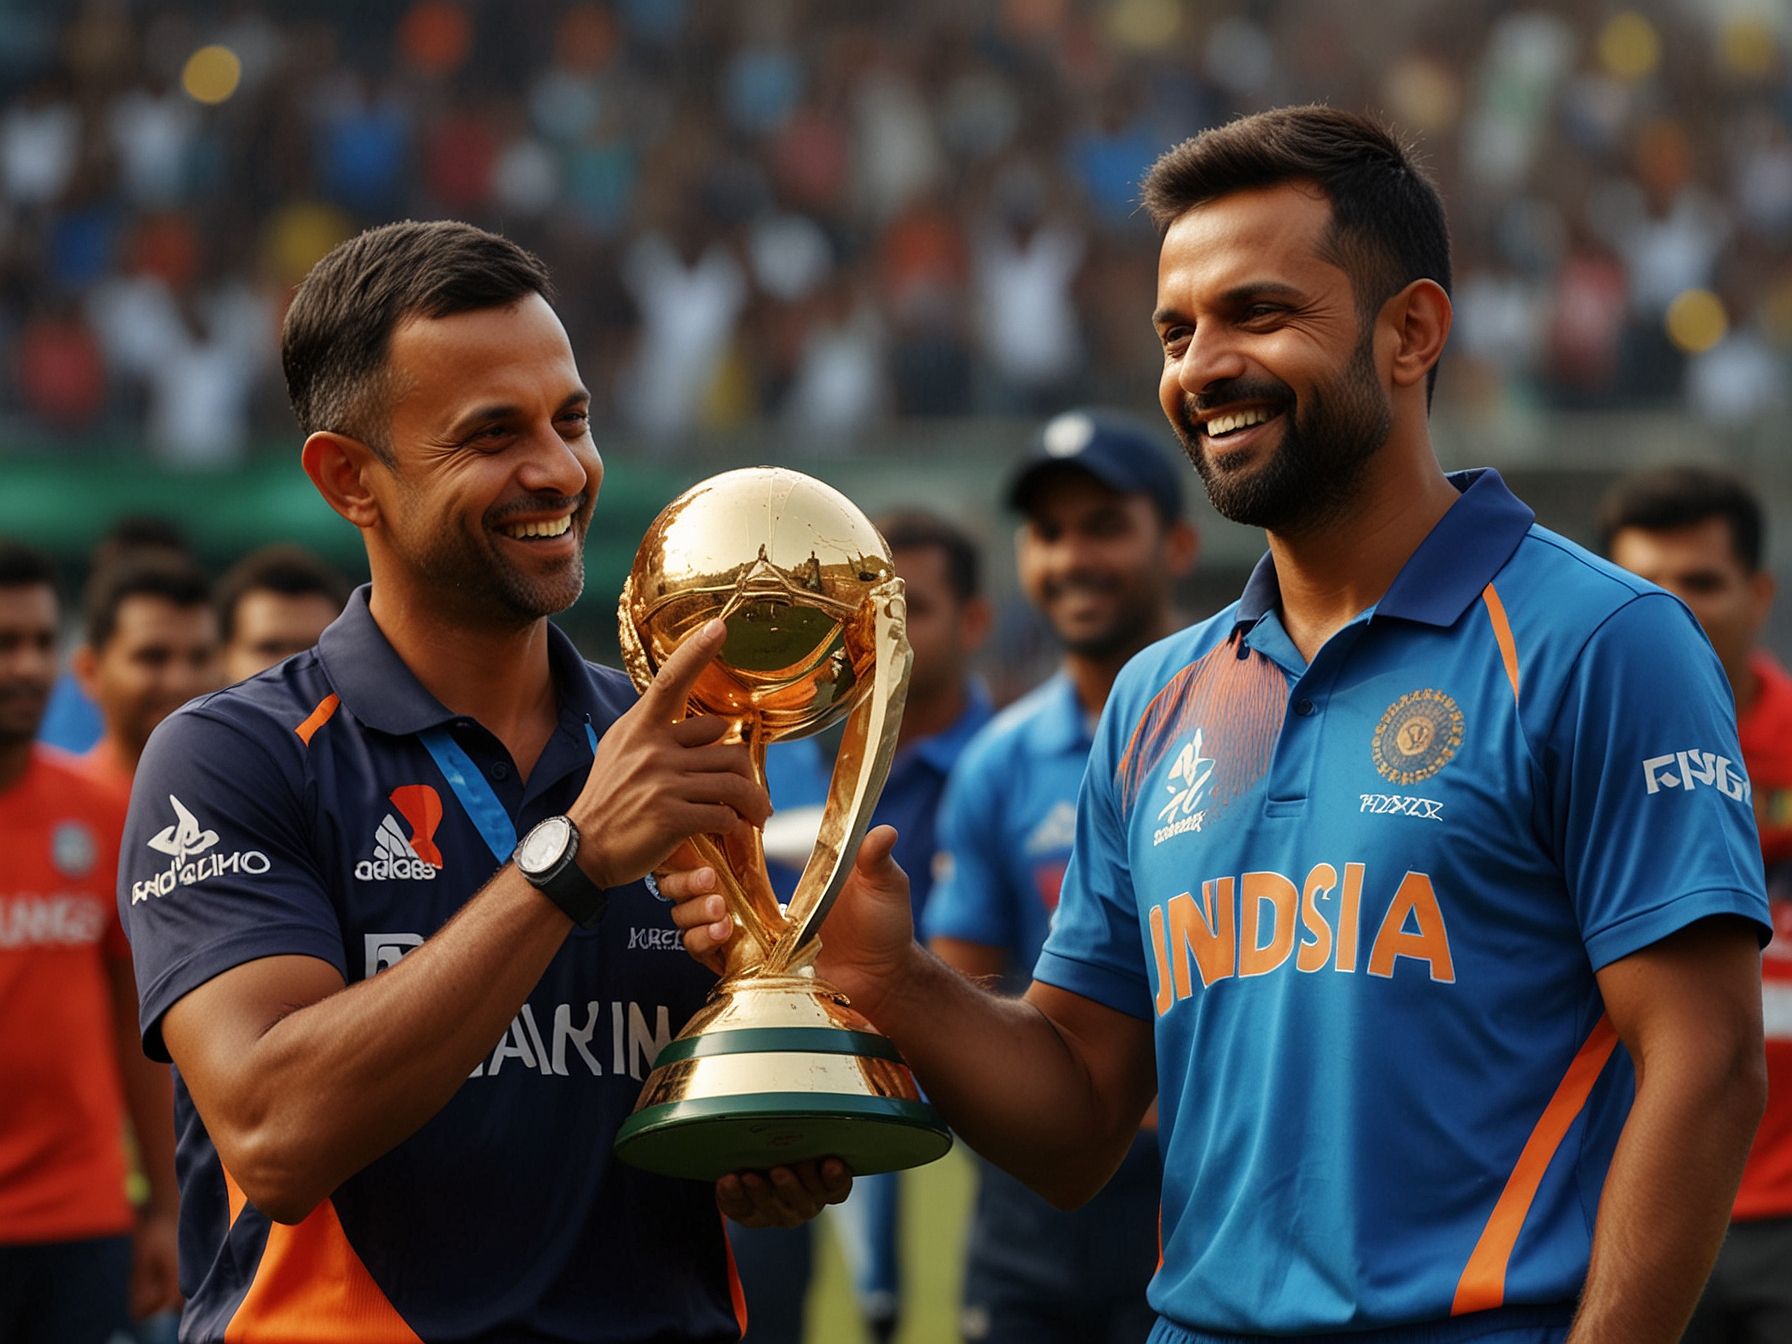 A jubilant Rahul Dravid receives the World Cup trophy from Virat Kohli. The emotional moment showcases Dravid's unrestrained happiness and respect from the Indian cricket team for his contributions.